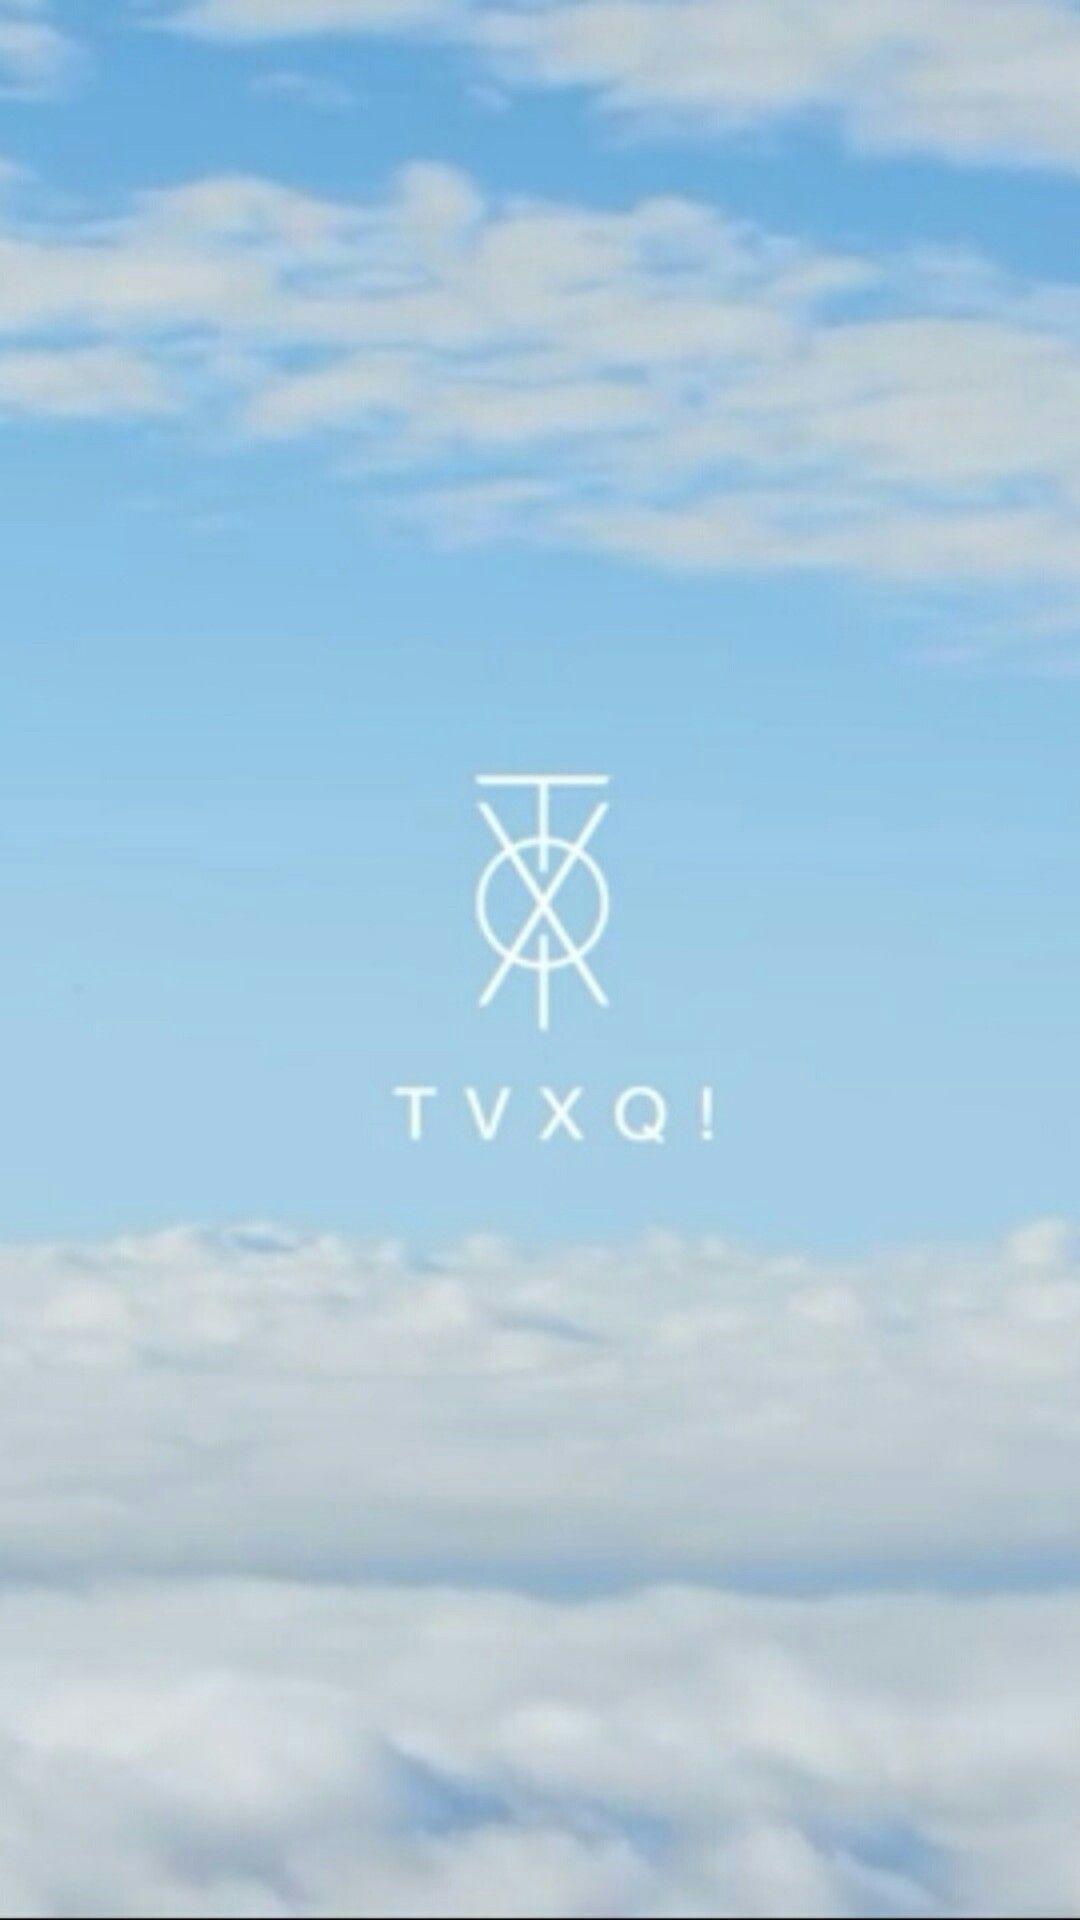 Tvxq Wallpapers Top Free Tvxq Backgrounds Wallpaperaccess